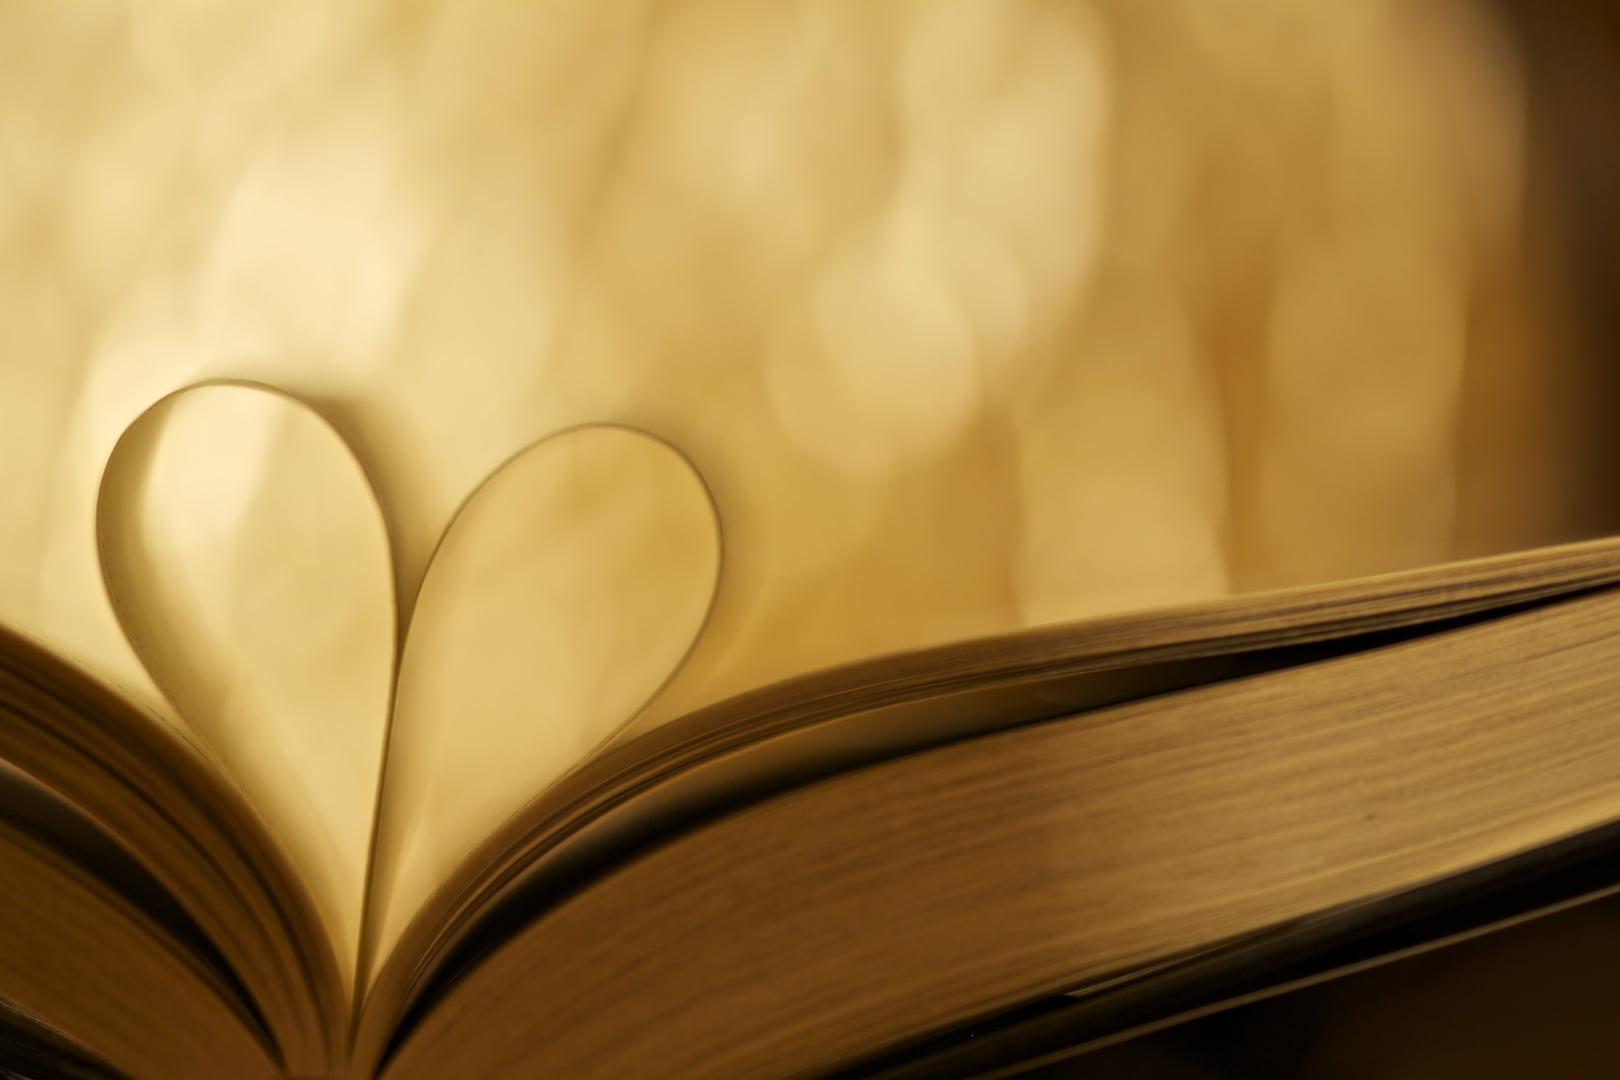 photo of heart-shaped book page